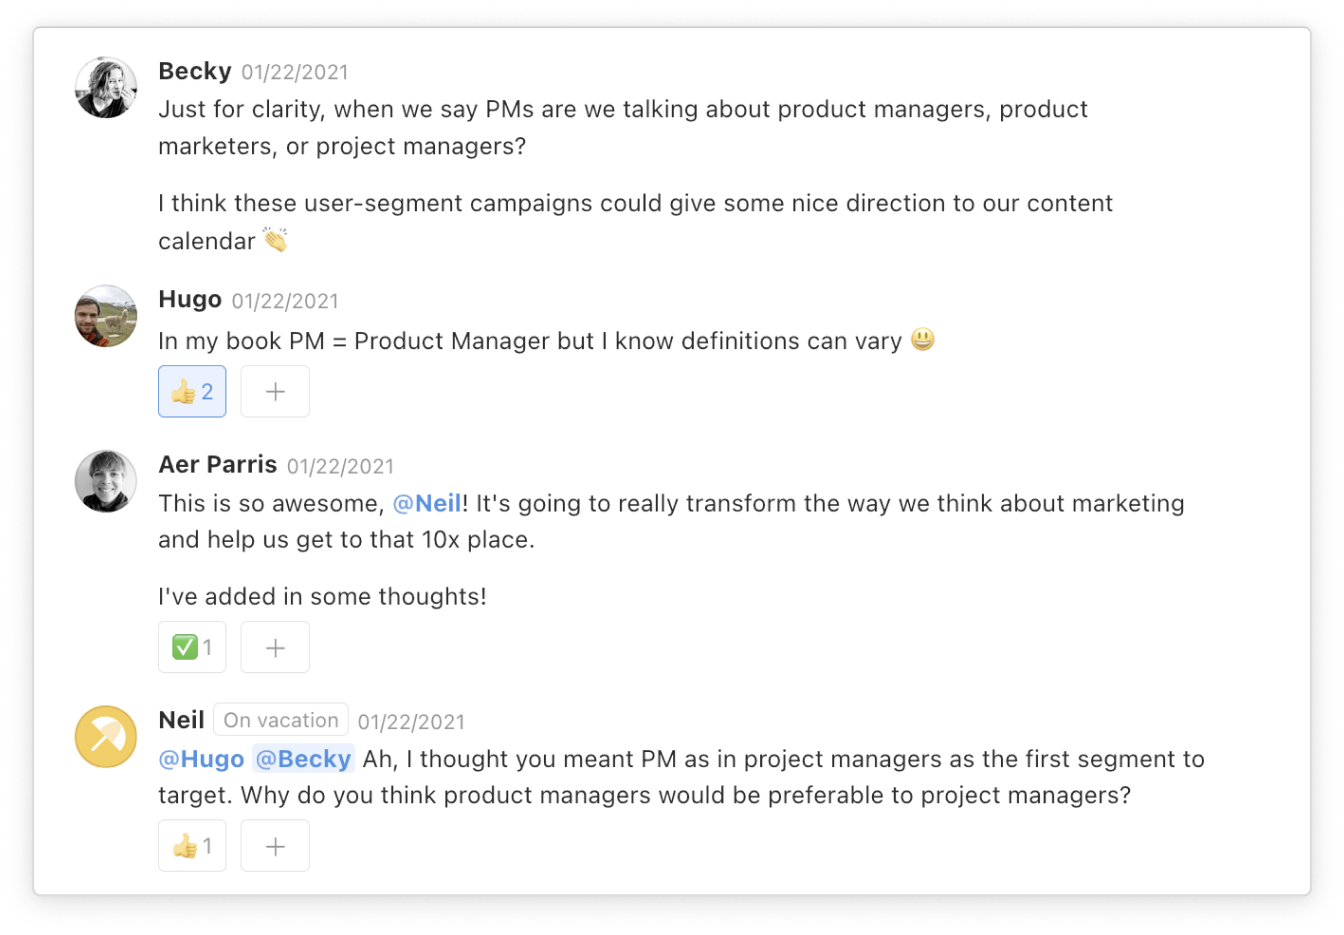 In this example, Becky asks, "Just for clarity, when we say PMs are we talking about product managers, product marketers, or project managers?" Then Hugo responds, "In my book PM = Product Managers, but I know definitions can vary." Then Neil writes, "Ah, I thought you meant PM as in project managers as the first segment to target. Why do you think product managers would be preferable to project managers?"